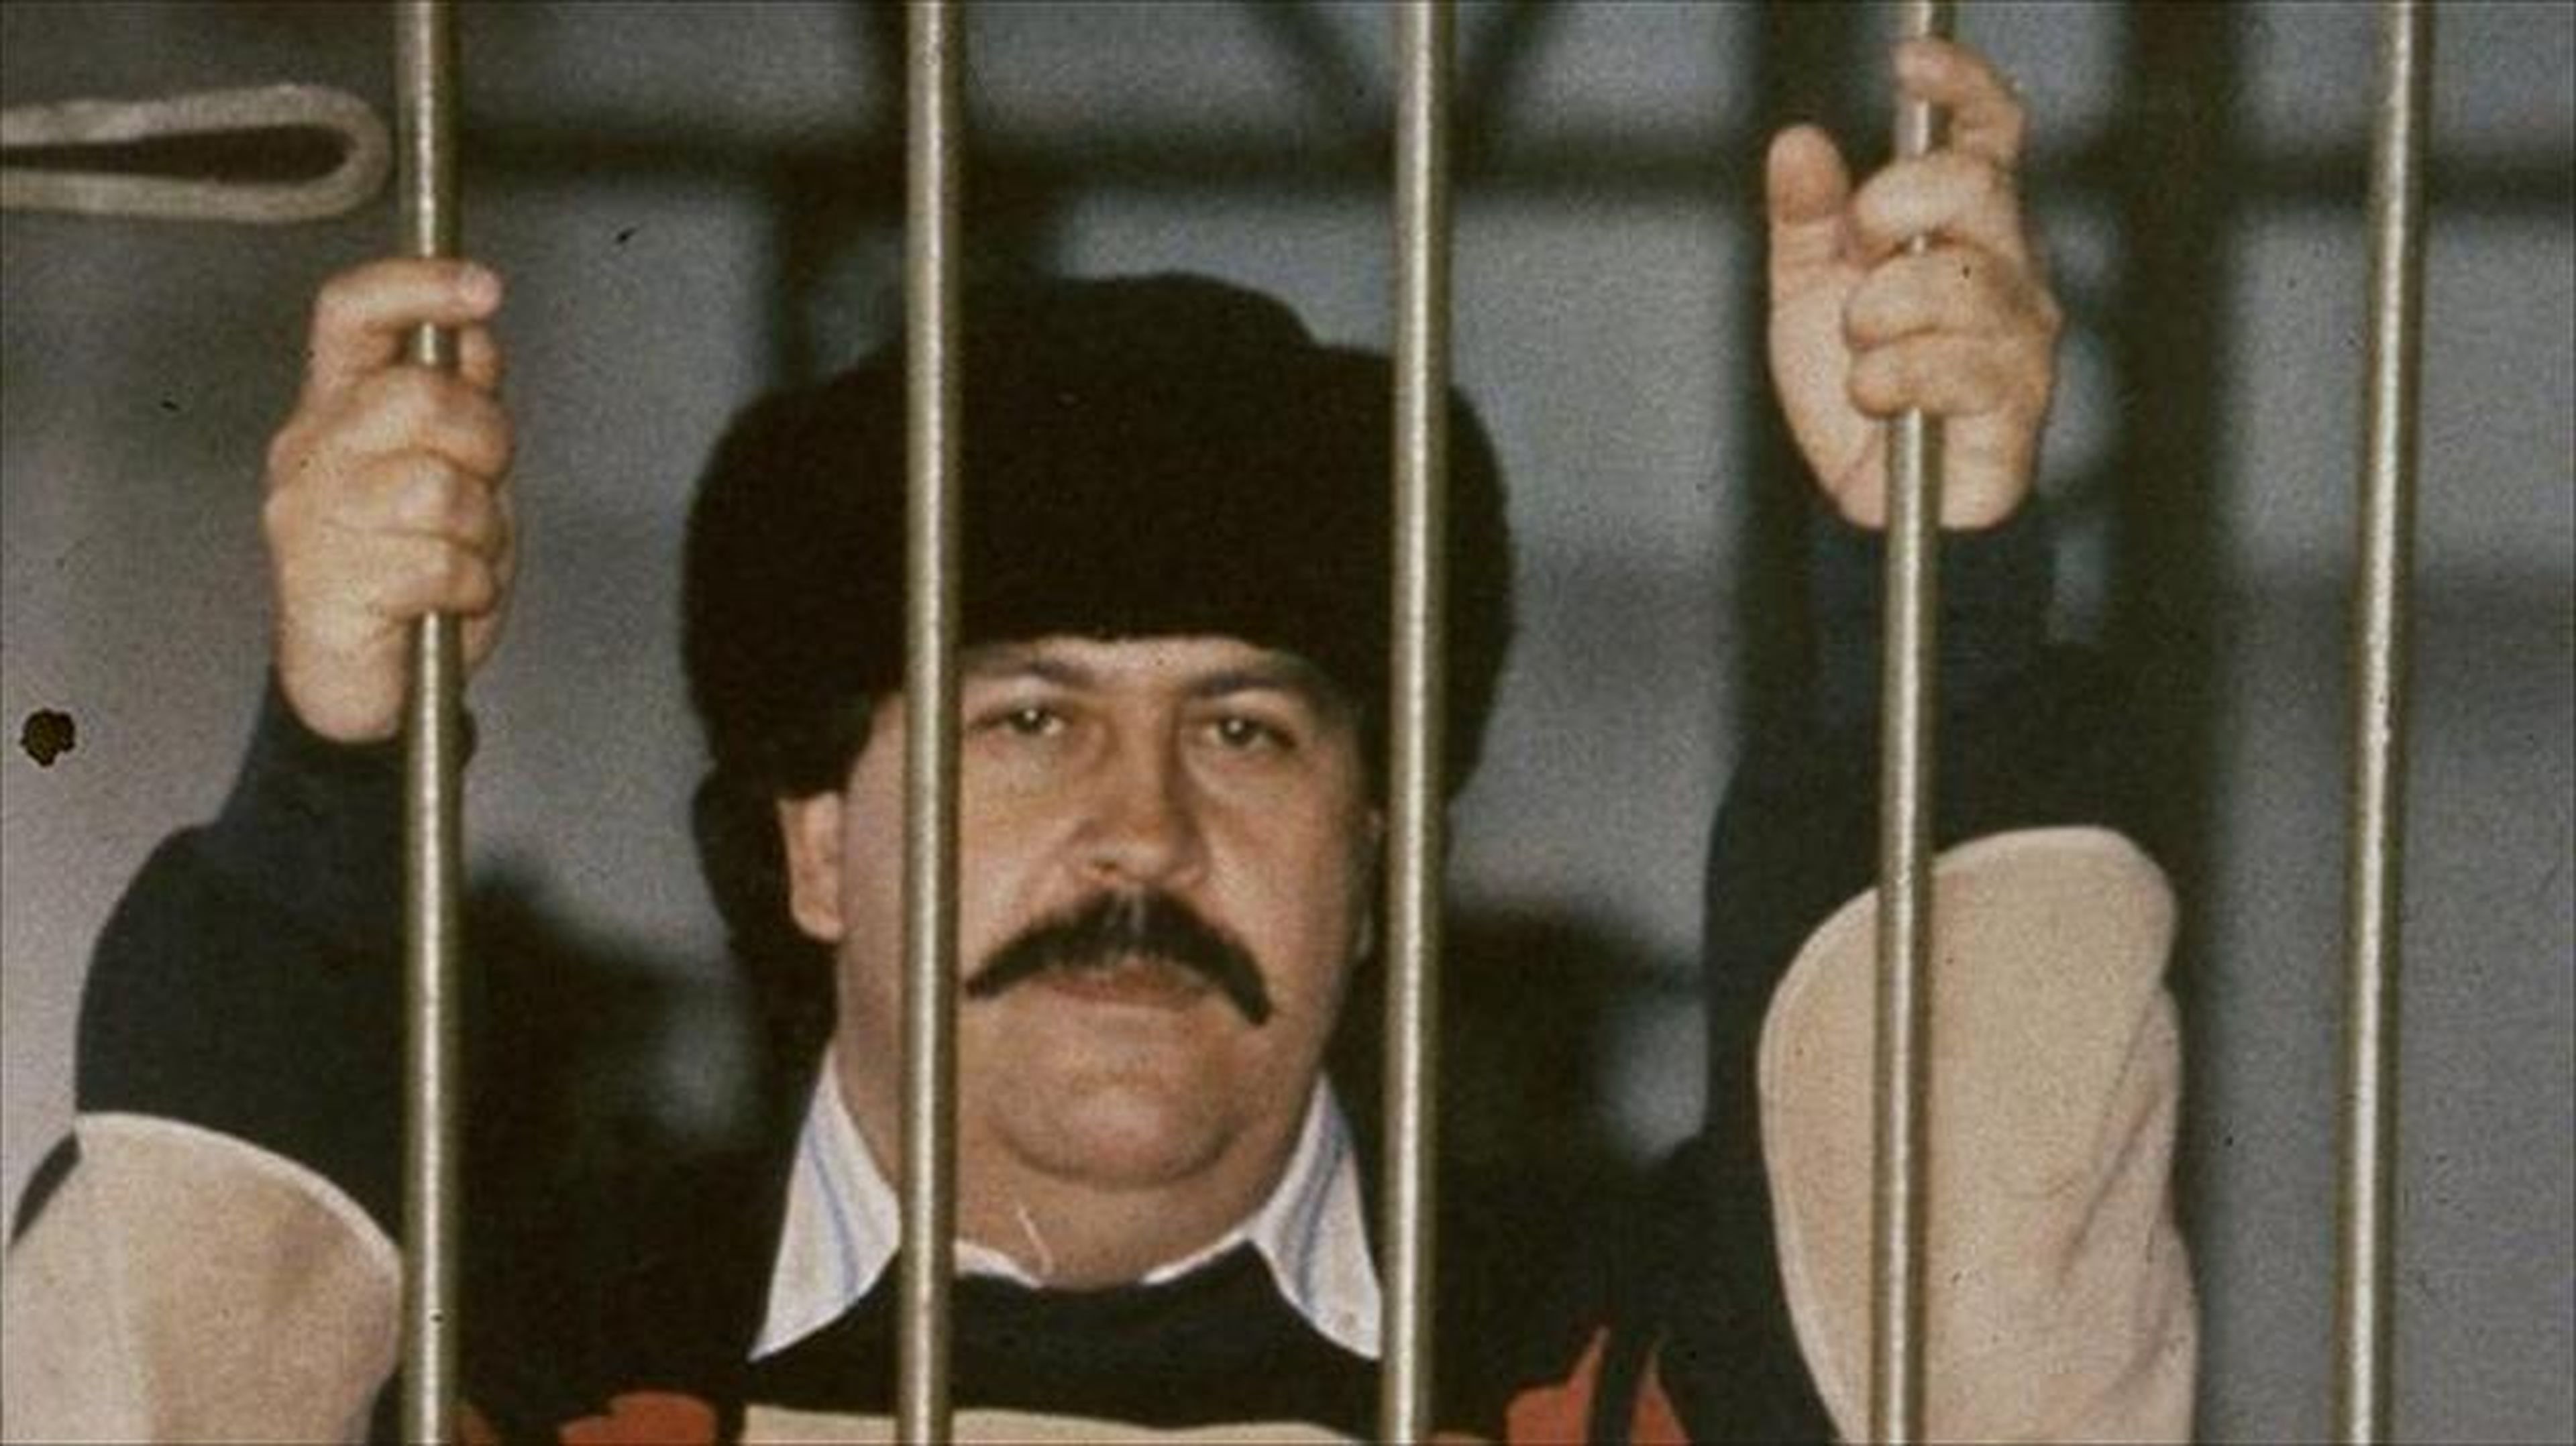 'El Chapo' Guzman's reign is finally at an end — here's how he compares to Colombian kingpin Pablo Escobar